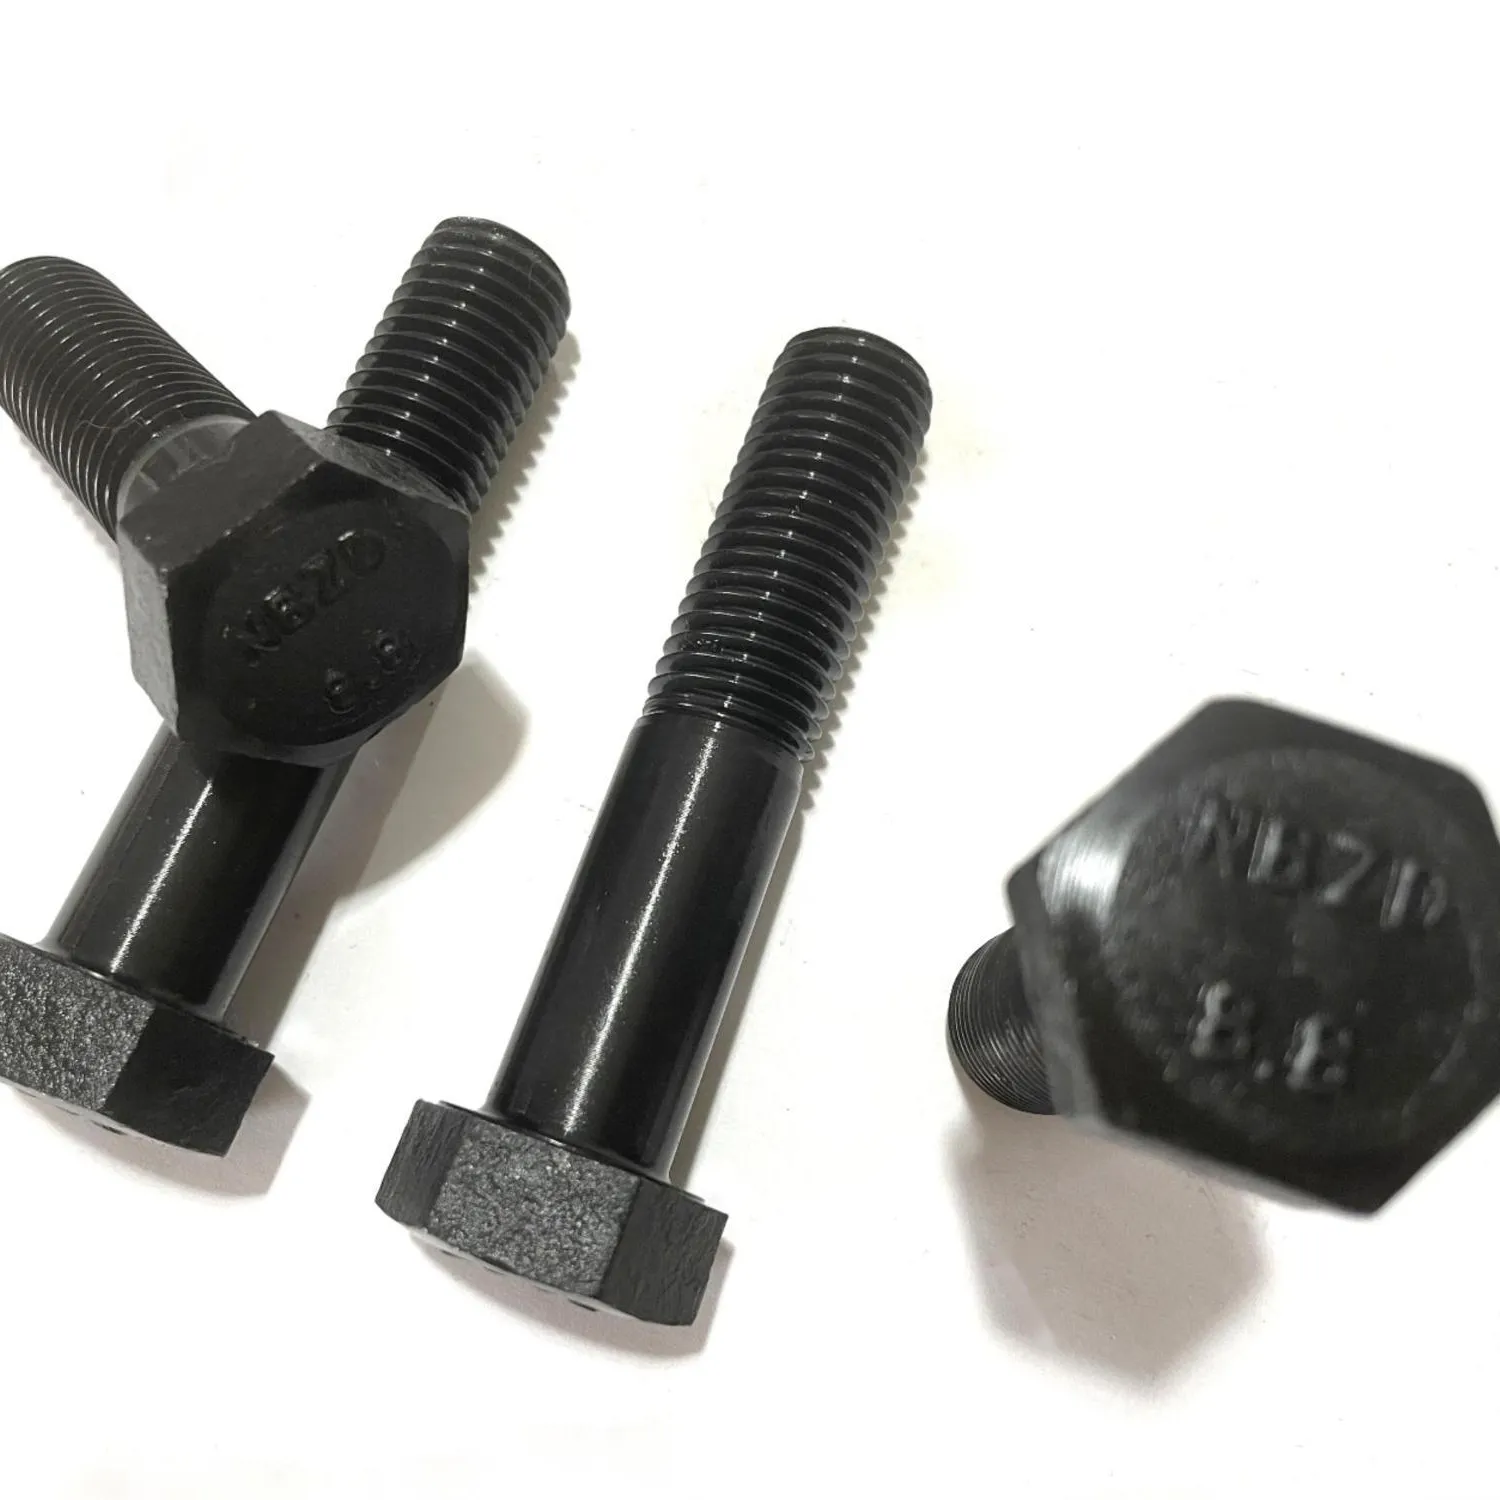 Grade Class 4.8 8.8 10.9 12.9 Galvanized Steel Black Oxide Partial half thread Hex Head Bolt DIN931 DIN933 Bolts and Nuts